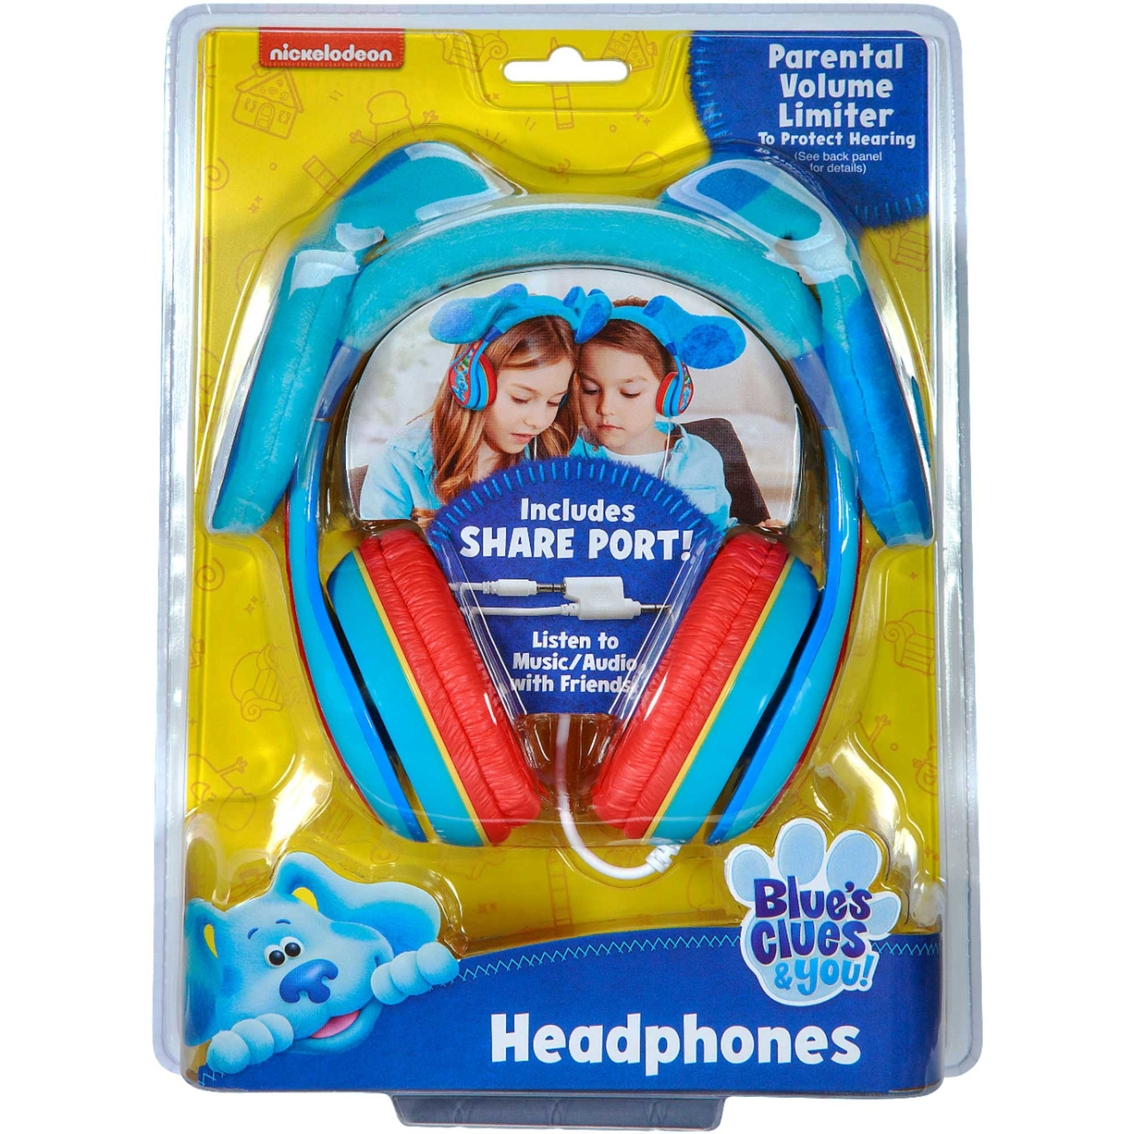 Blue's Clues and You Headphones - Image 1 of 3